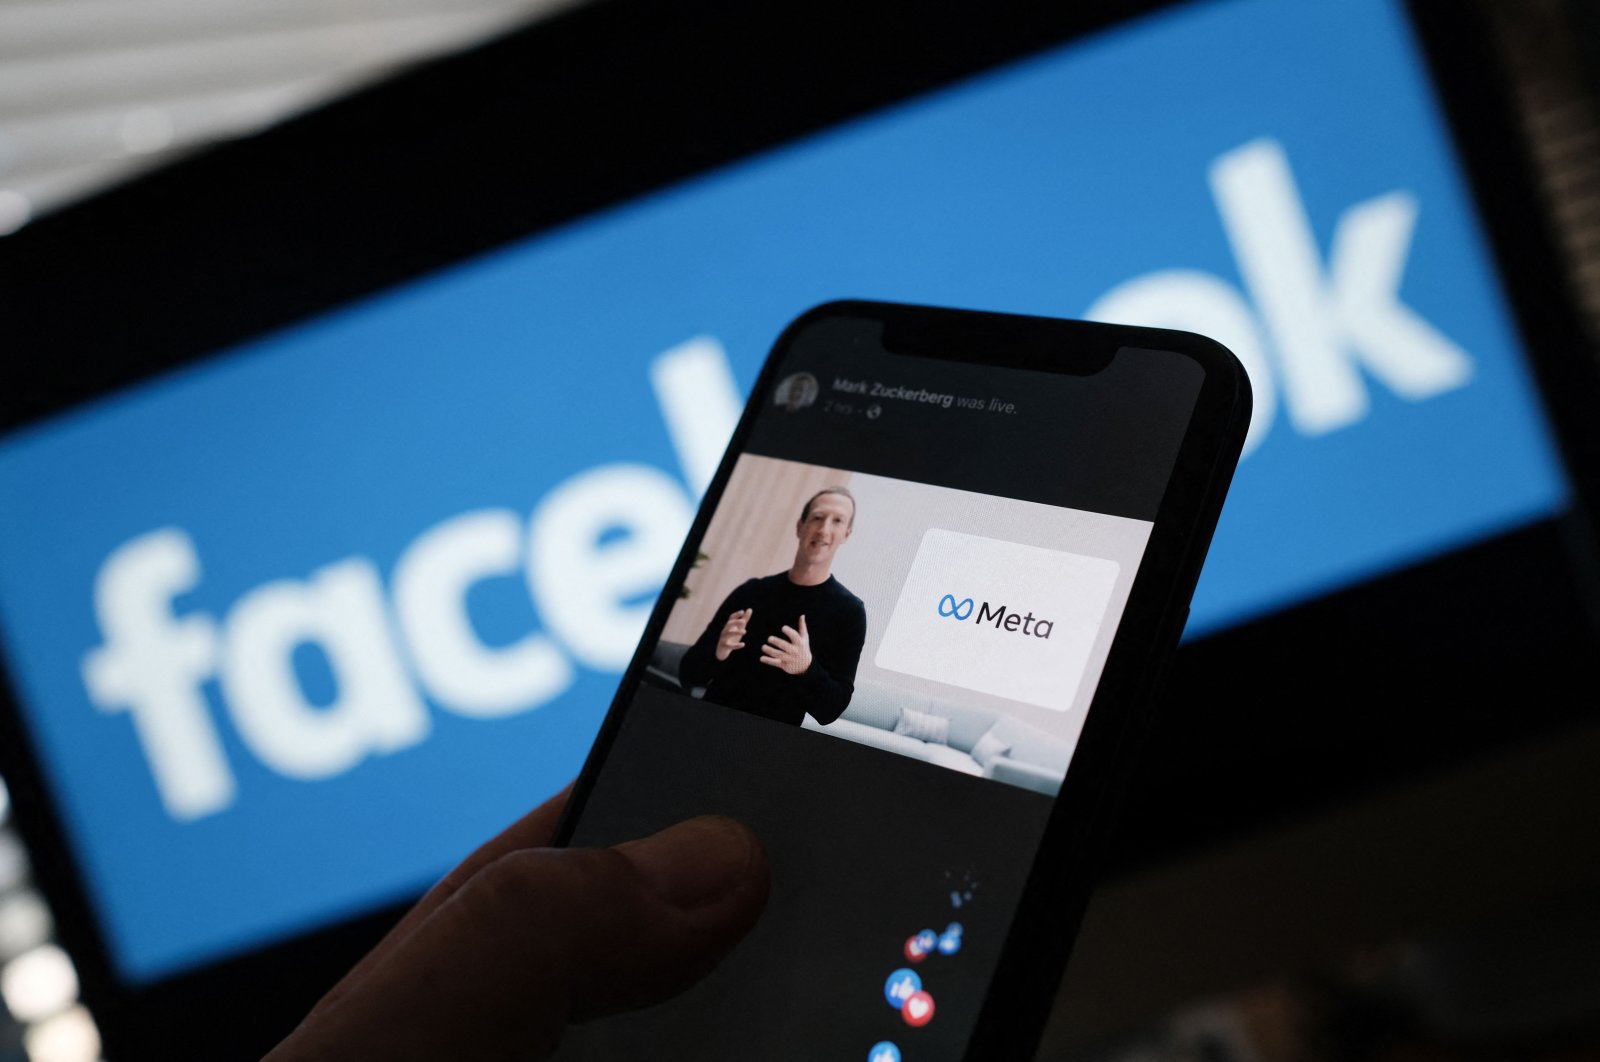 An illustration photo shows a person watching Facebook parent company Meta CEO Mark Zuckerberg unveiling the Meta logo from a smart phone in Los Angeles, U.S., Oct. 28, 2021. (AFP Photo)